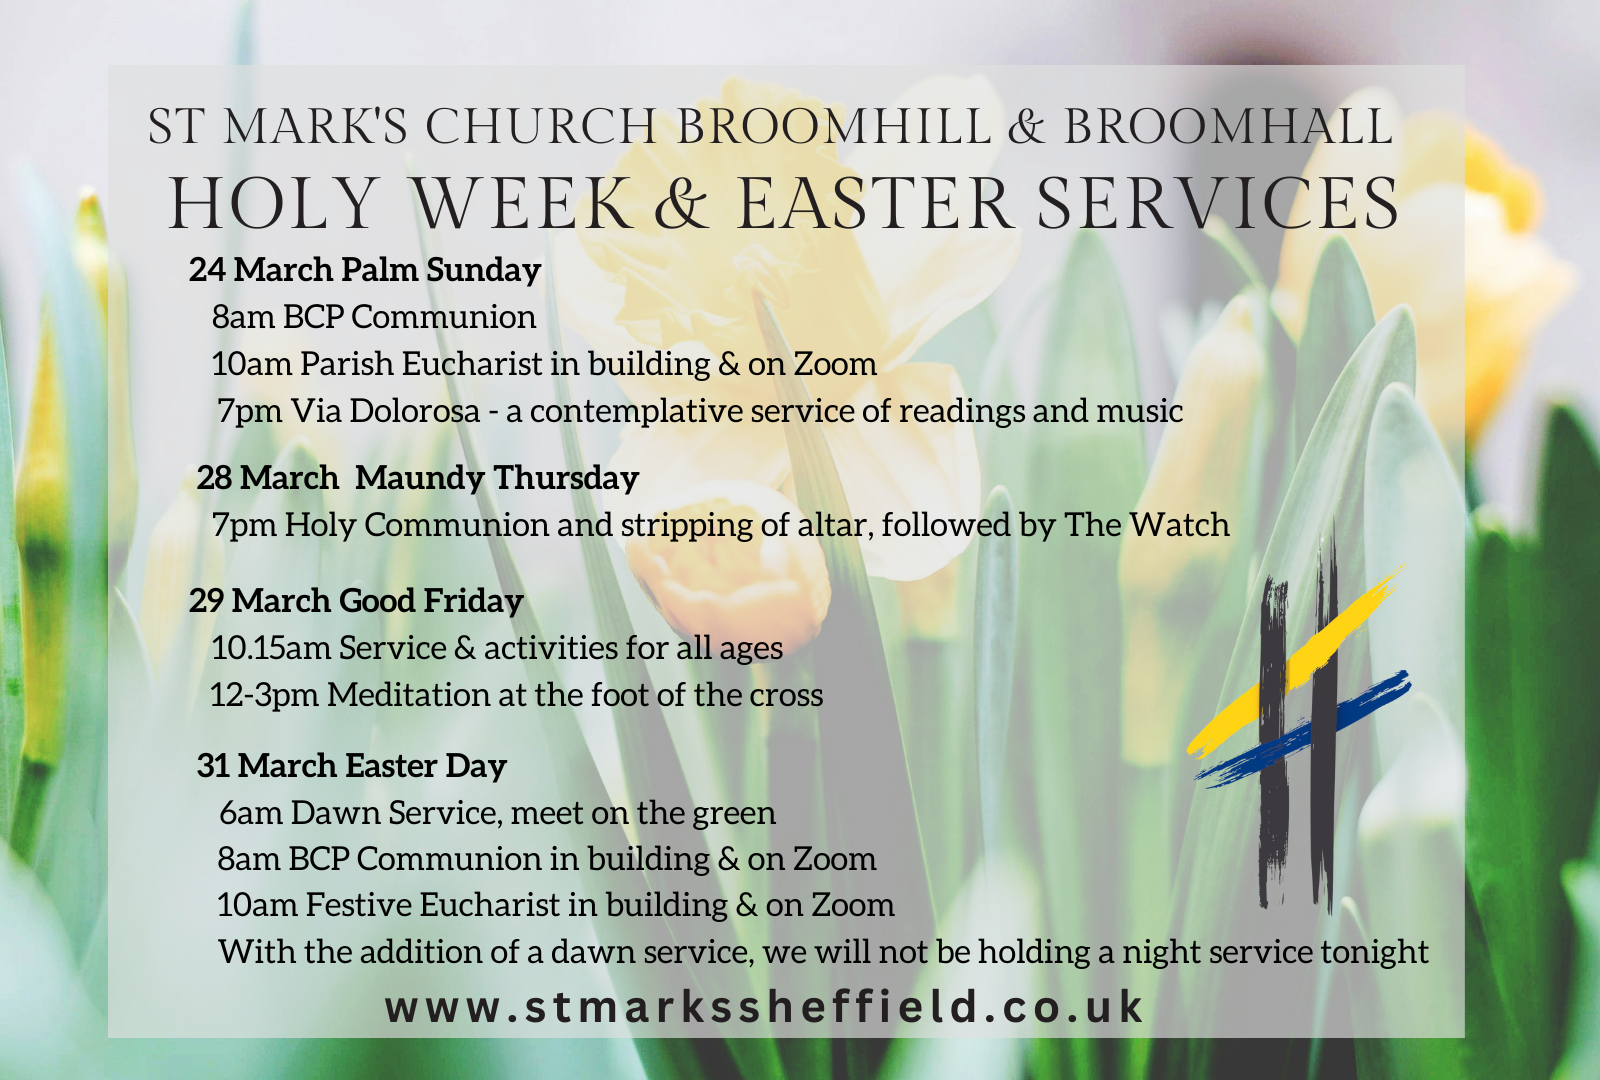 7pm Maundy Thursday Service, followed by The Watch